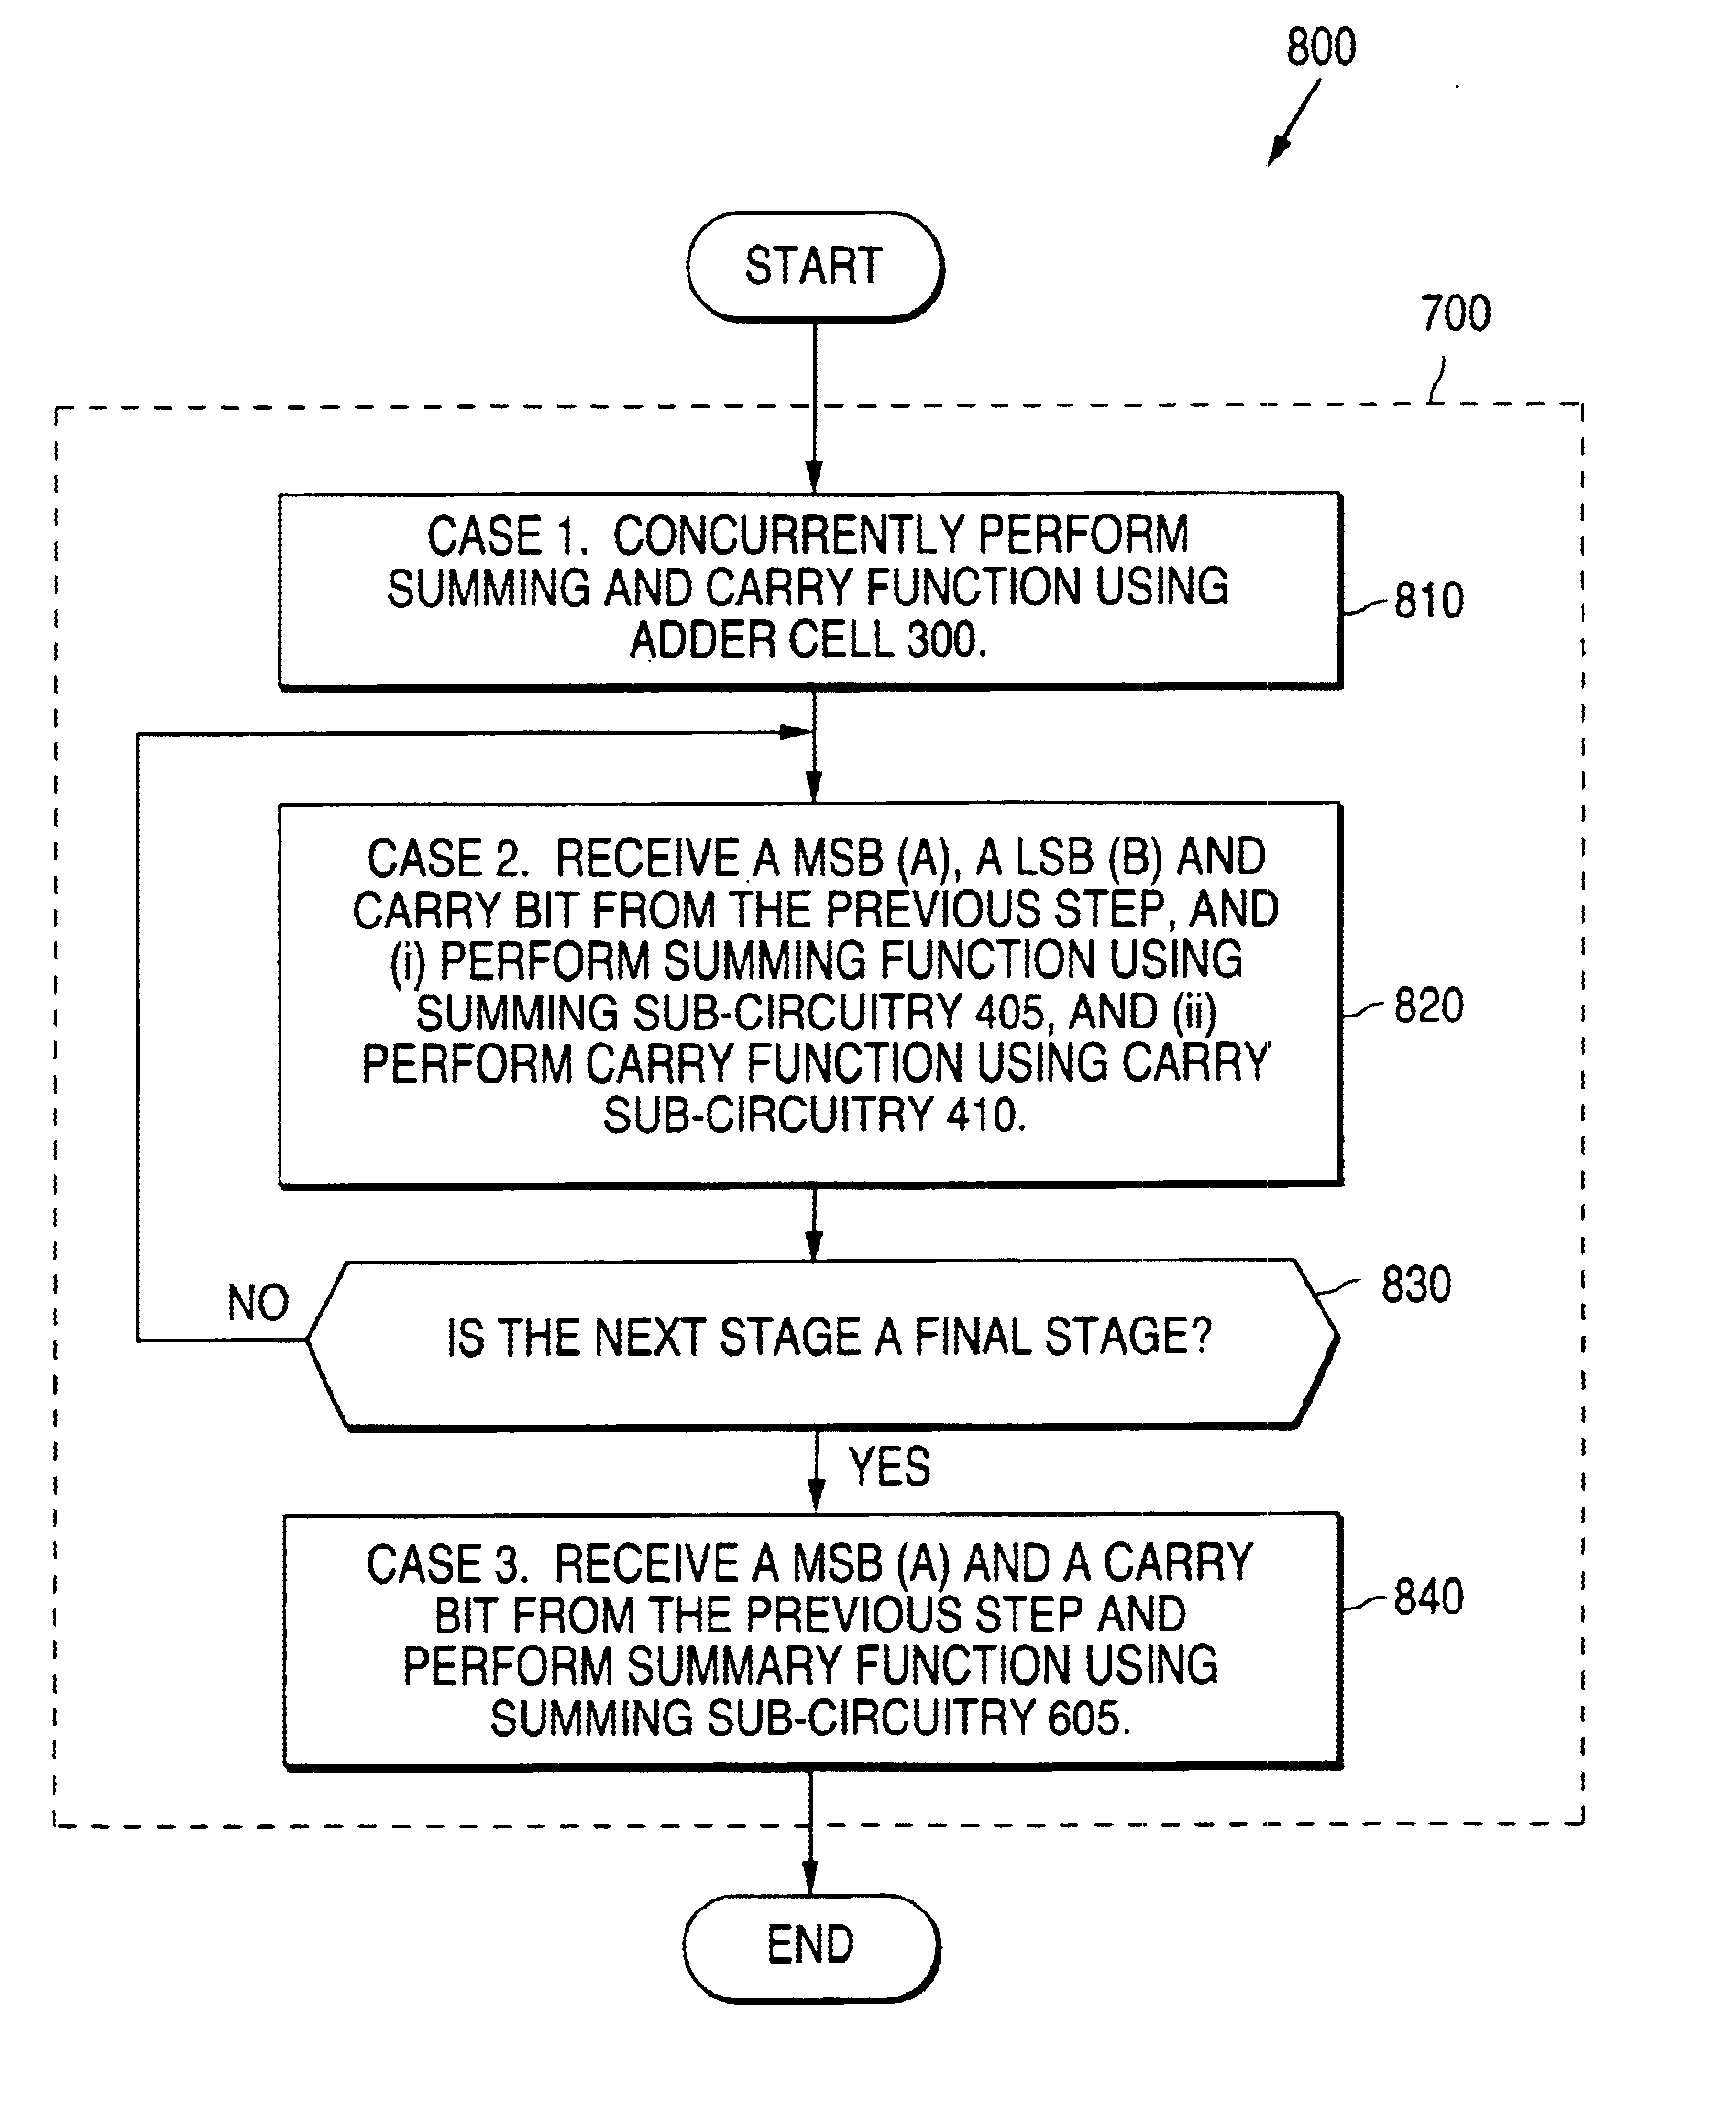 Three-state binary adders and methods of operating the same